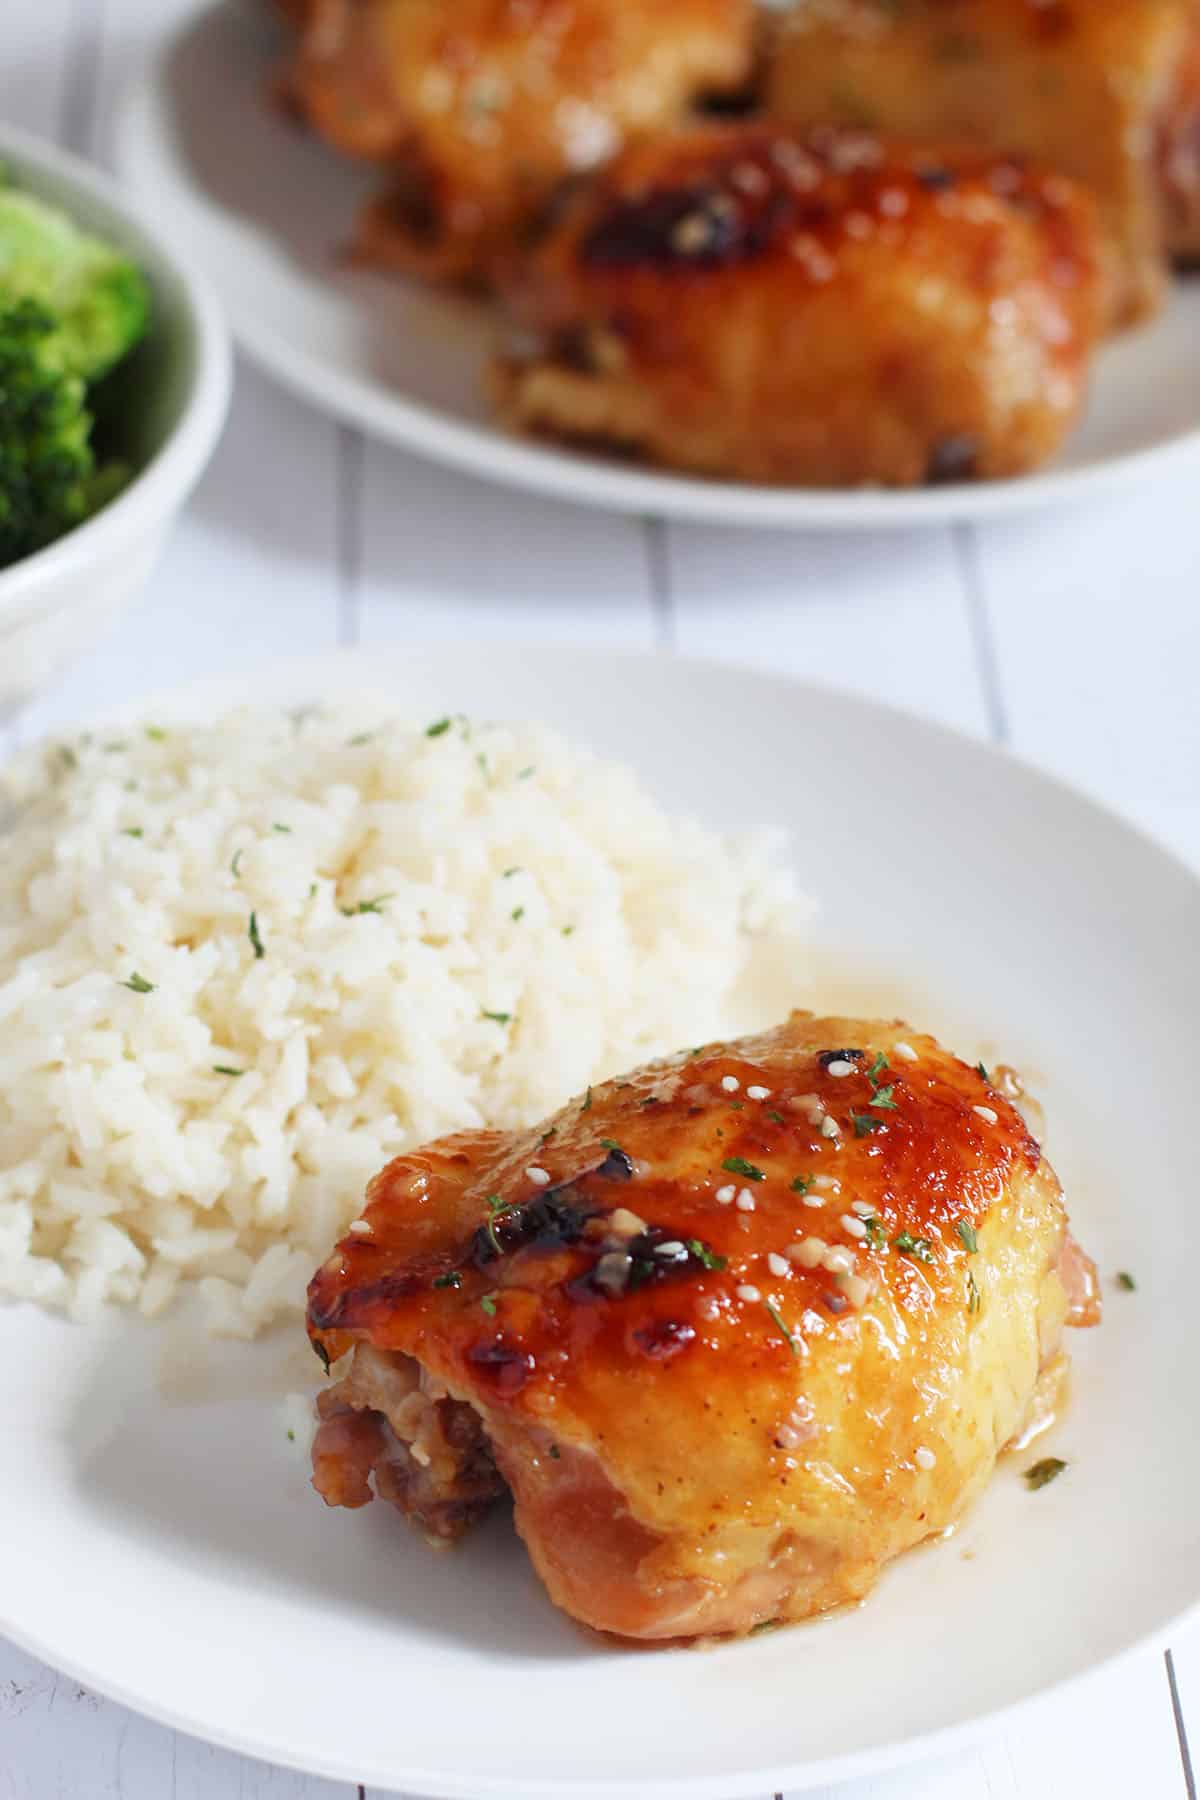 Baked chicken thigh and white steamed rice on white place with broccoli in background.